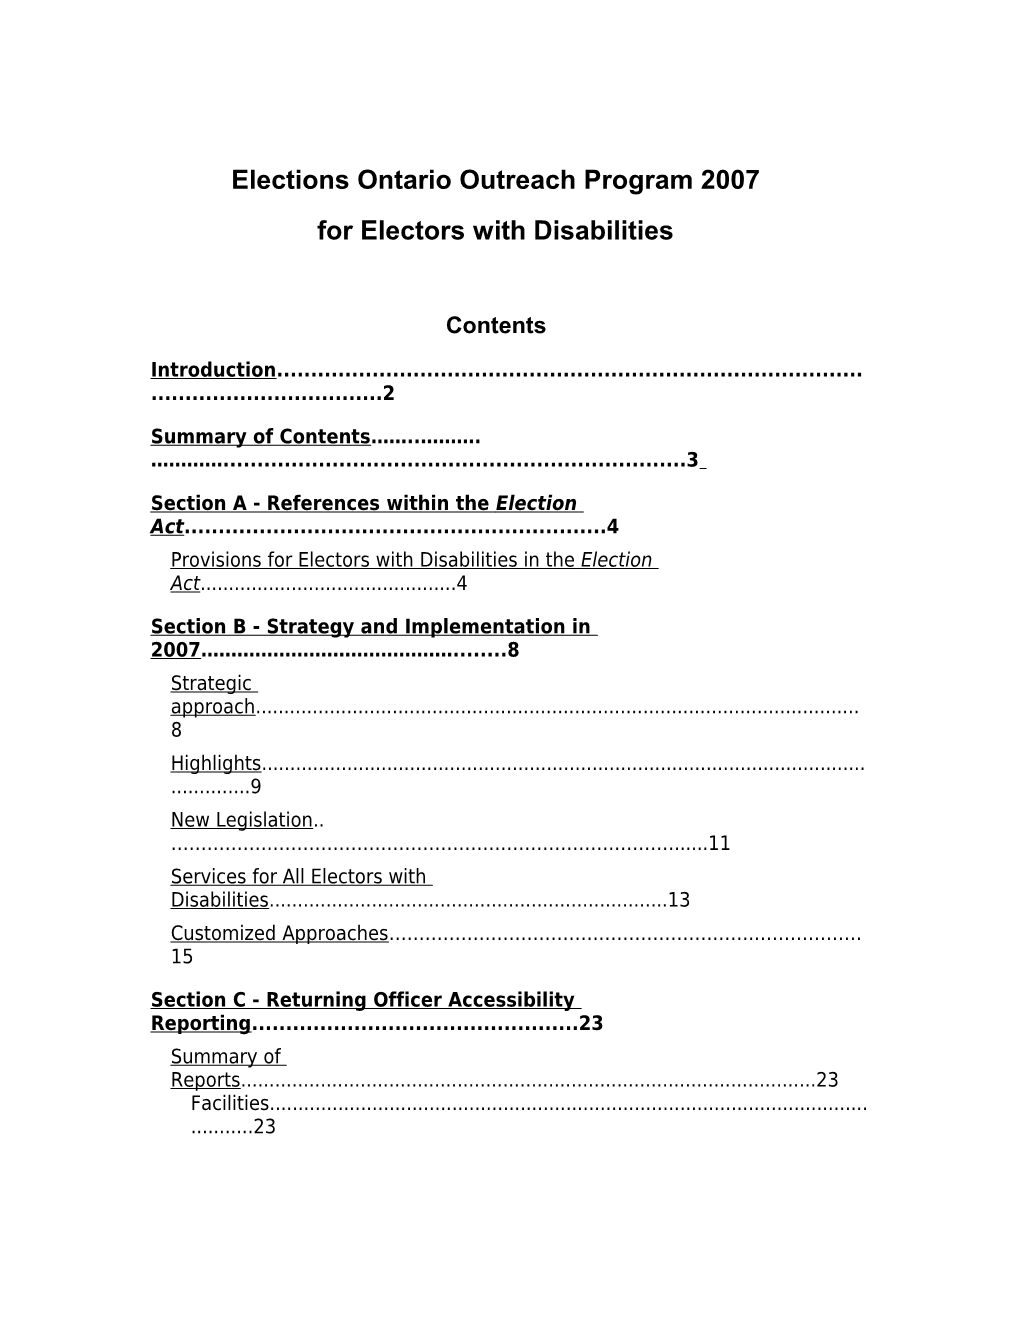 Review of Provinvial Election 2007 Accessibility Program